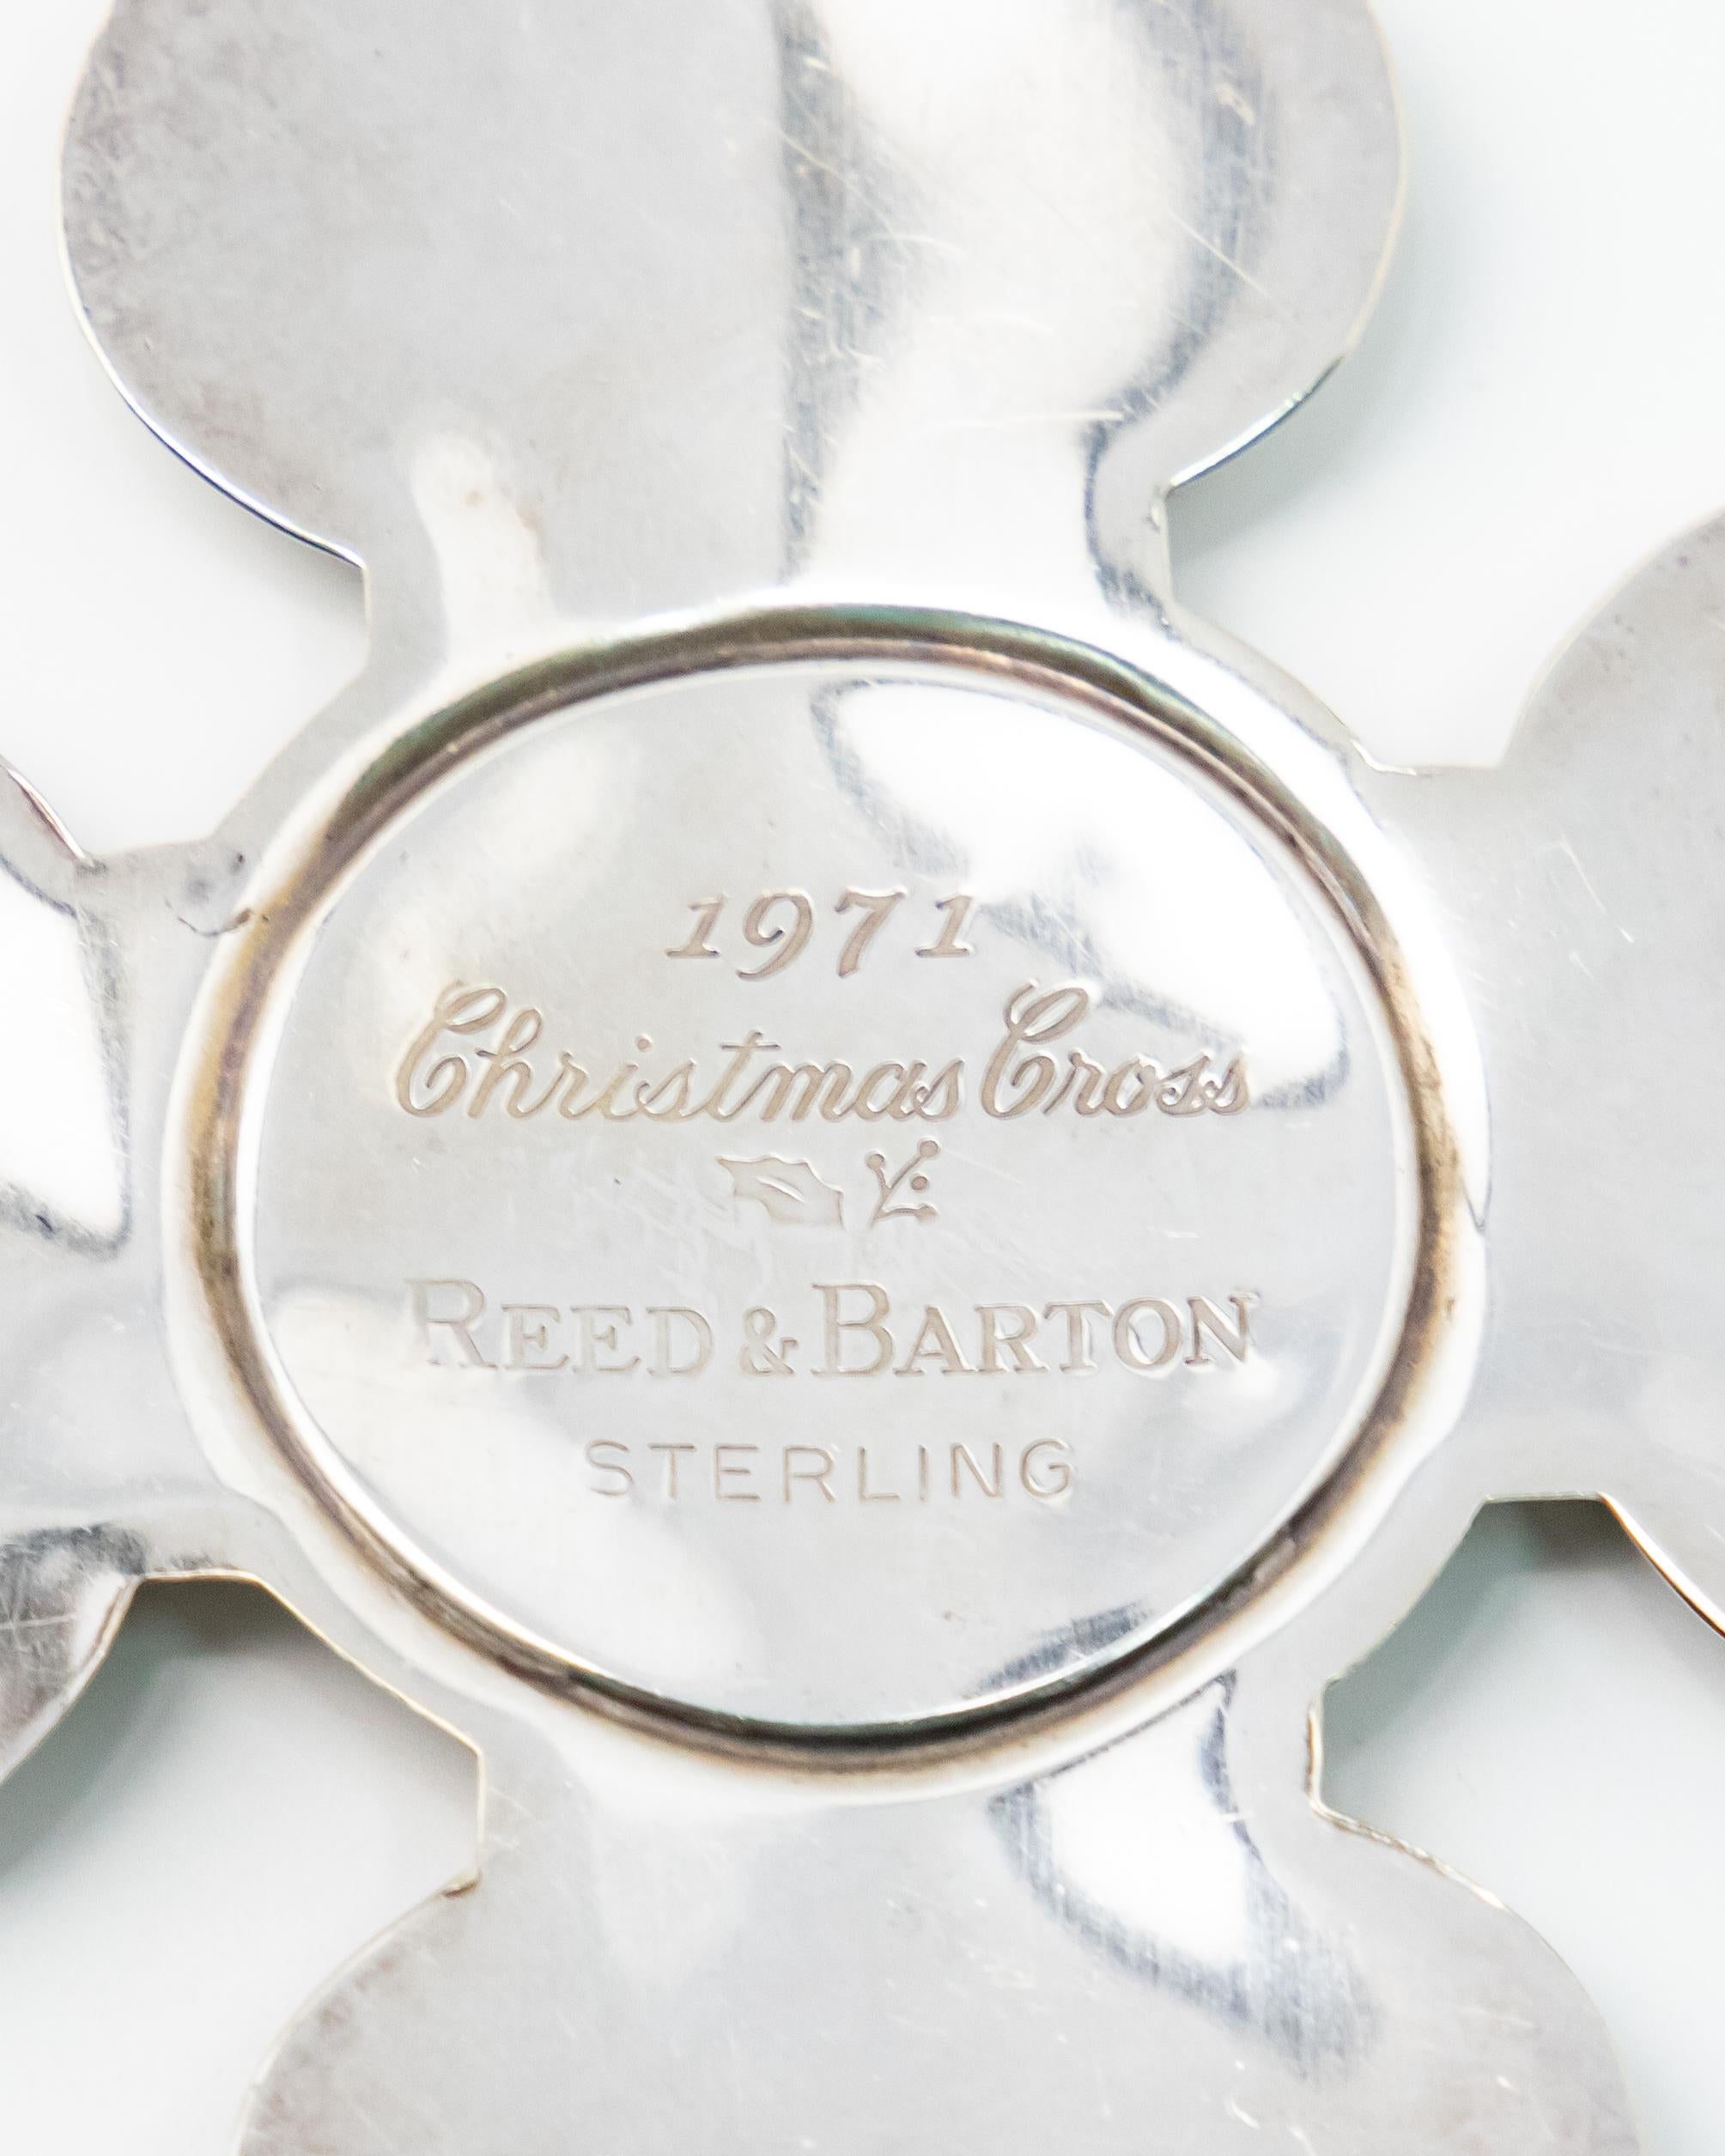 Late 20th Century Reed & Barton 1971 Christmas Cross For Sale